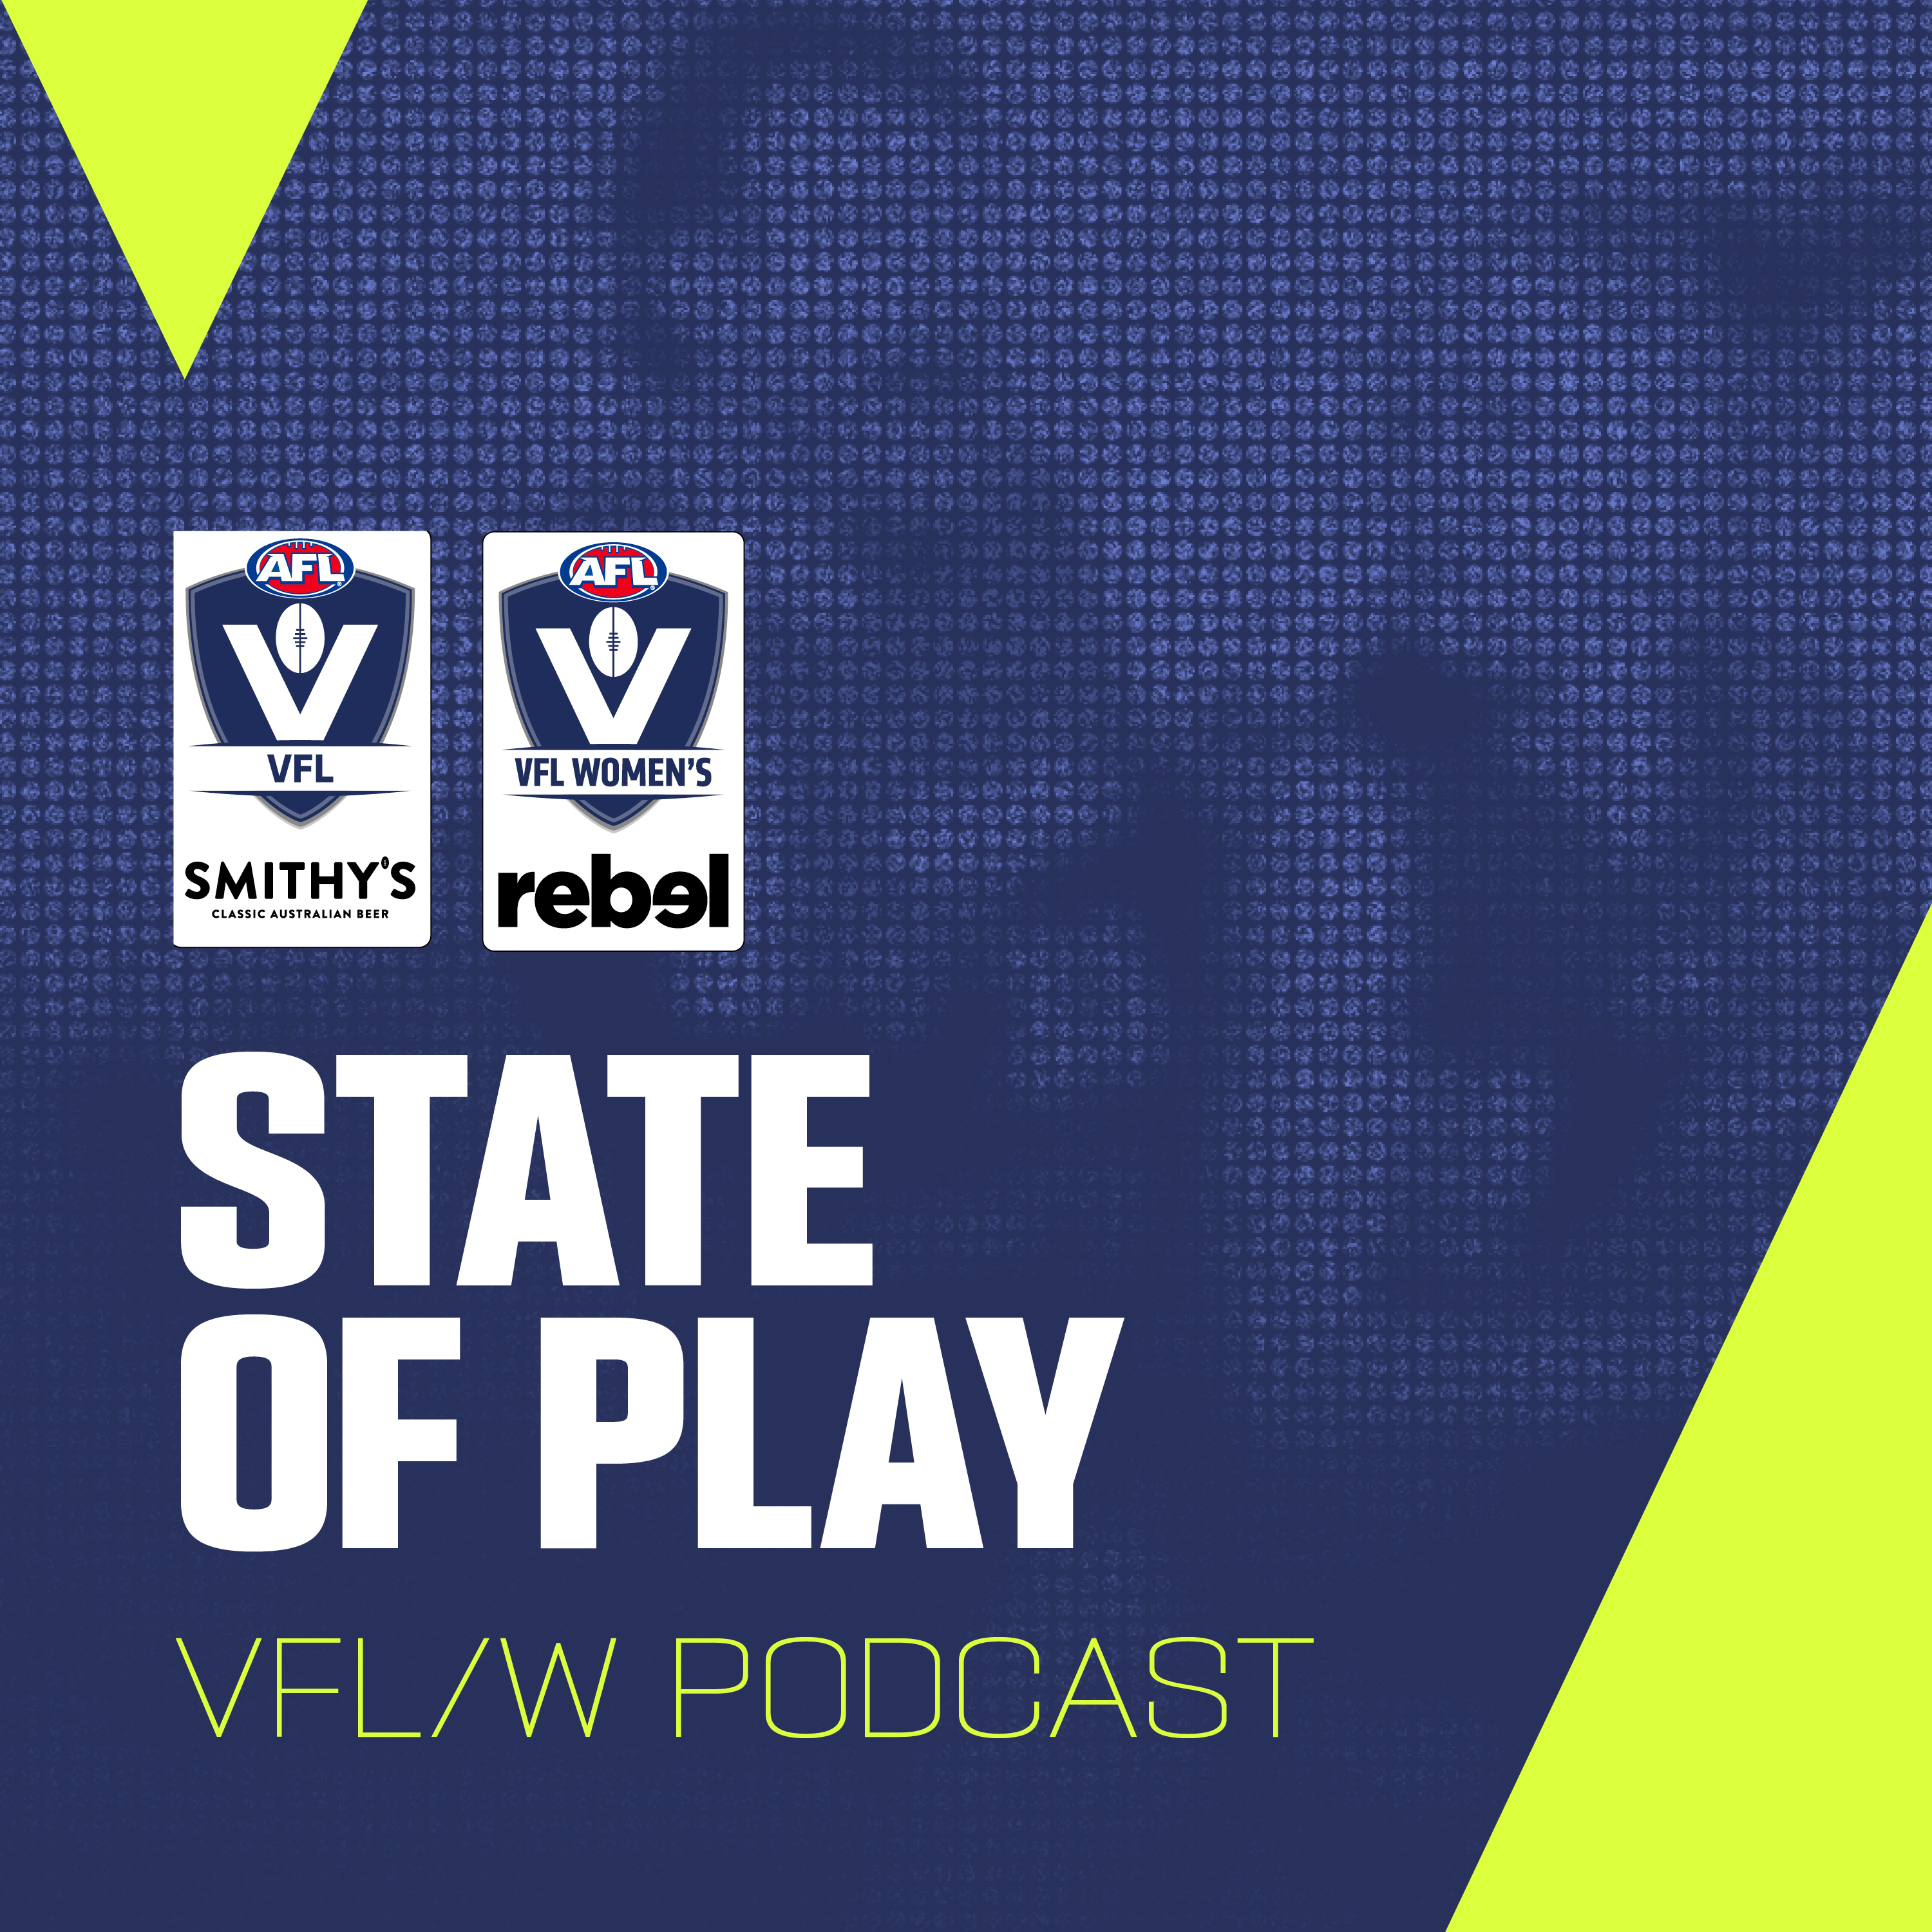 Jolley the new VFL Games Record Holder & Previewing the VFLW Preliminary Final